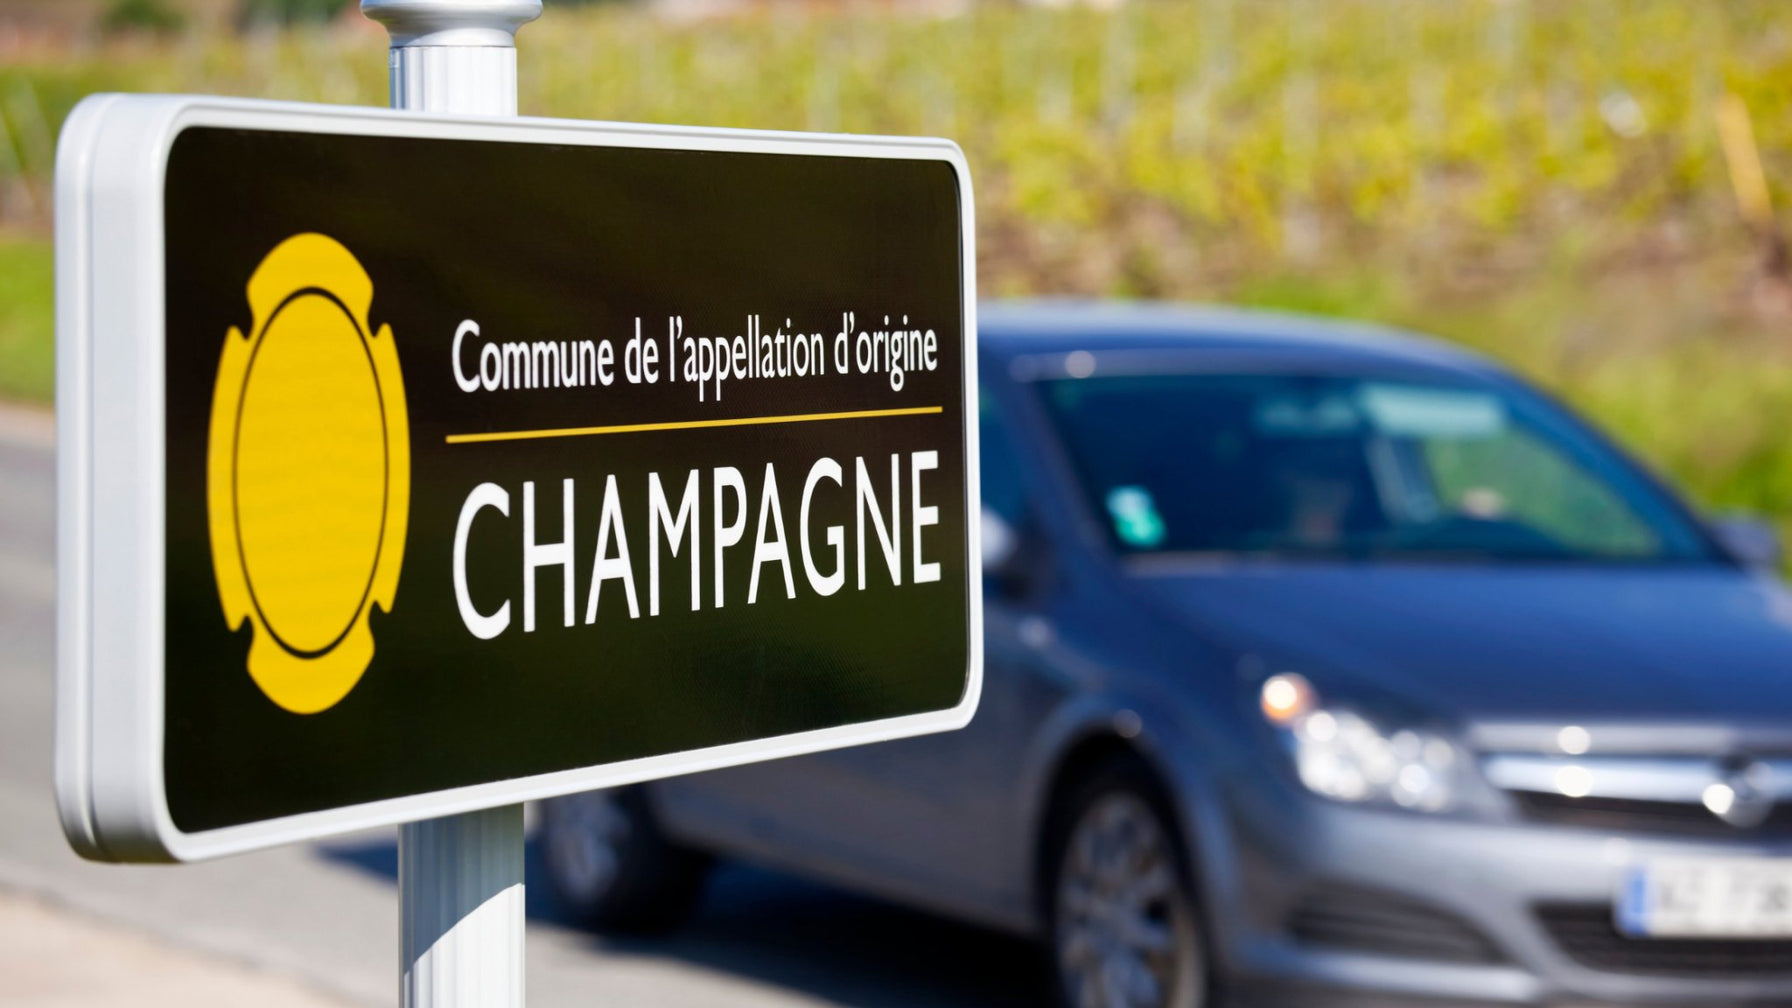 A Car of Champagne, Covid, Cold Weather and the Cote D’Azur